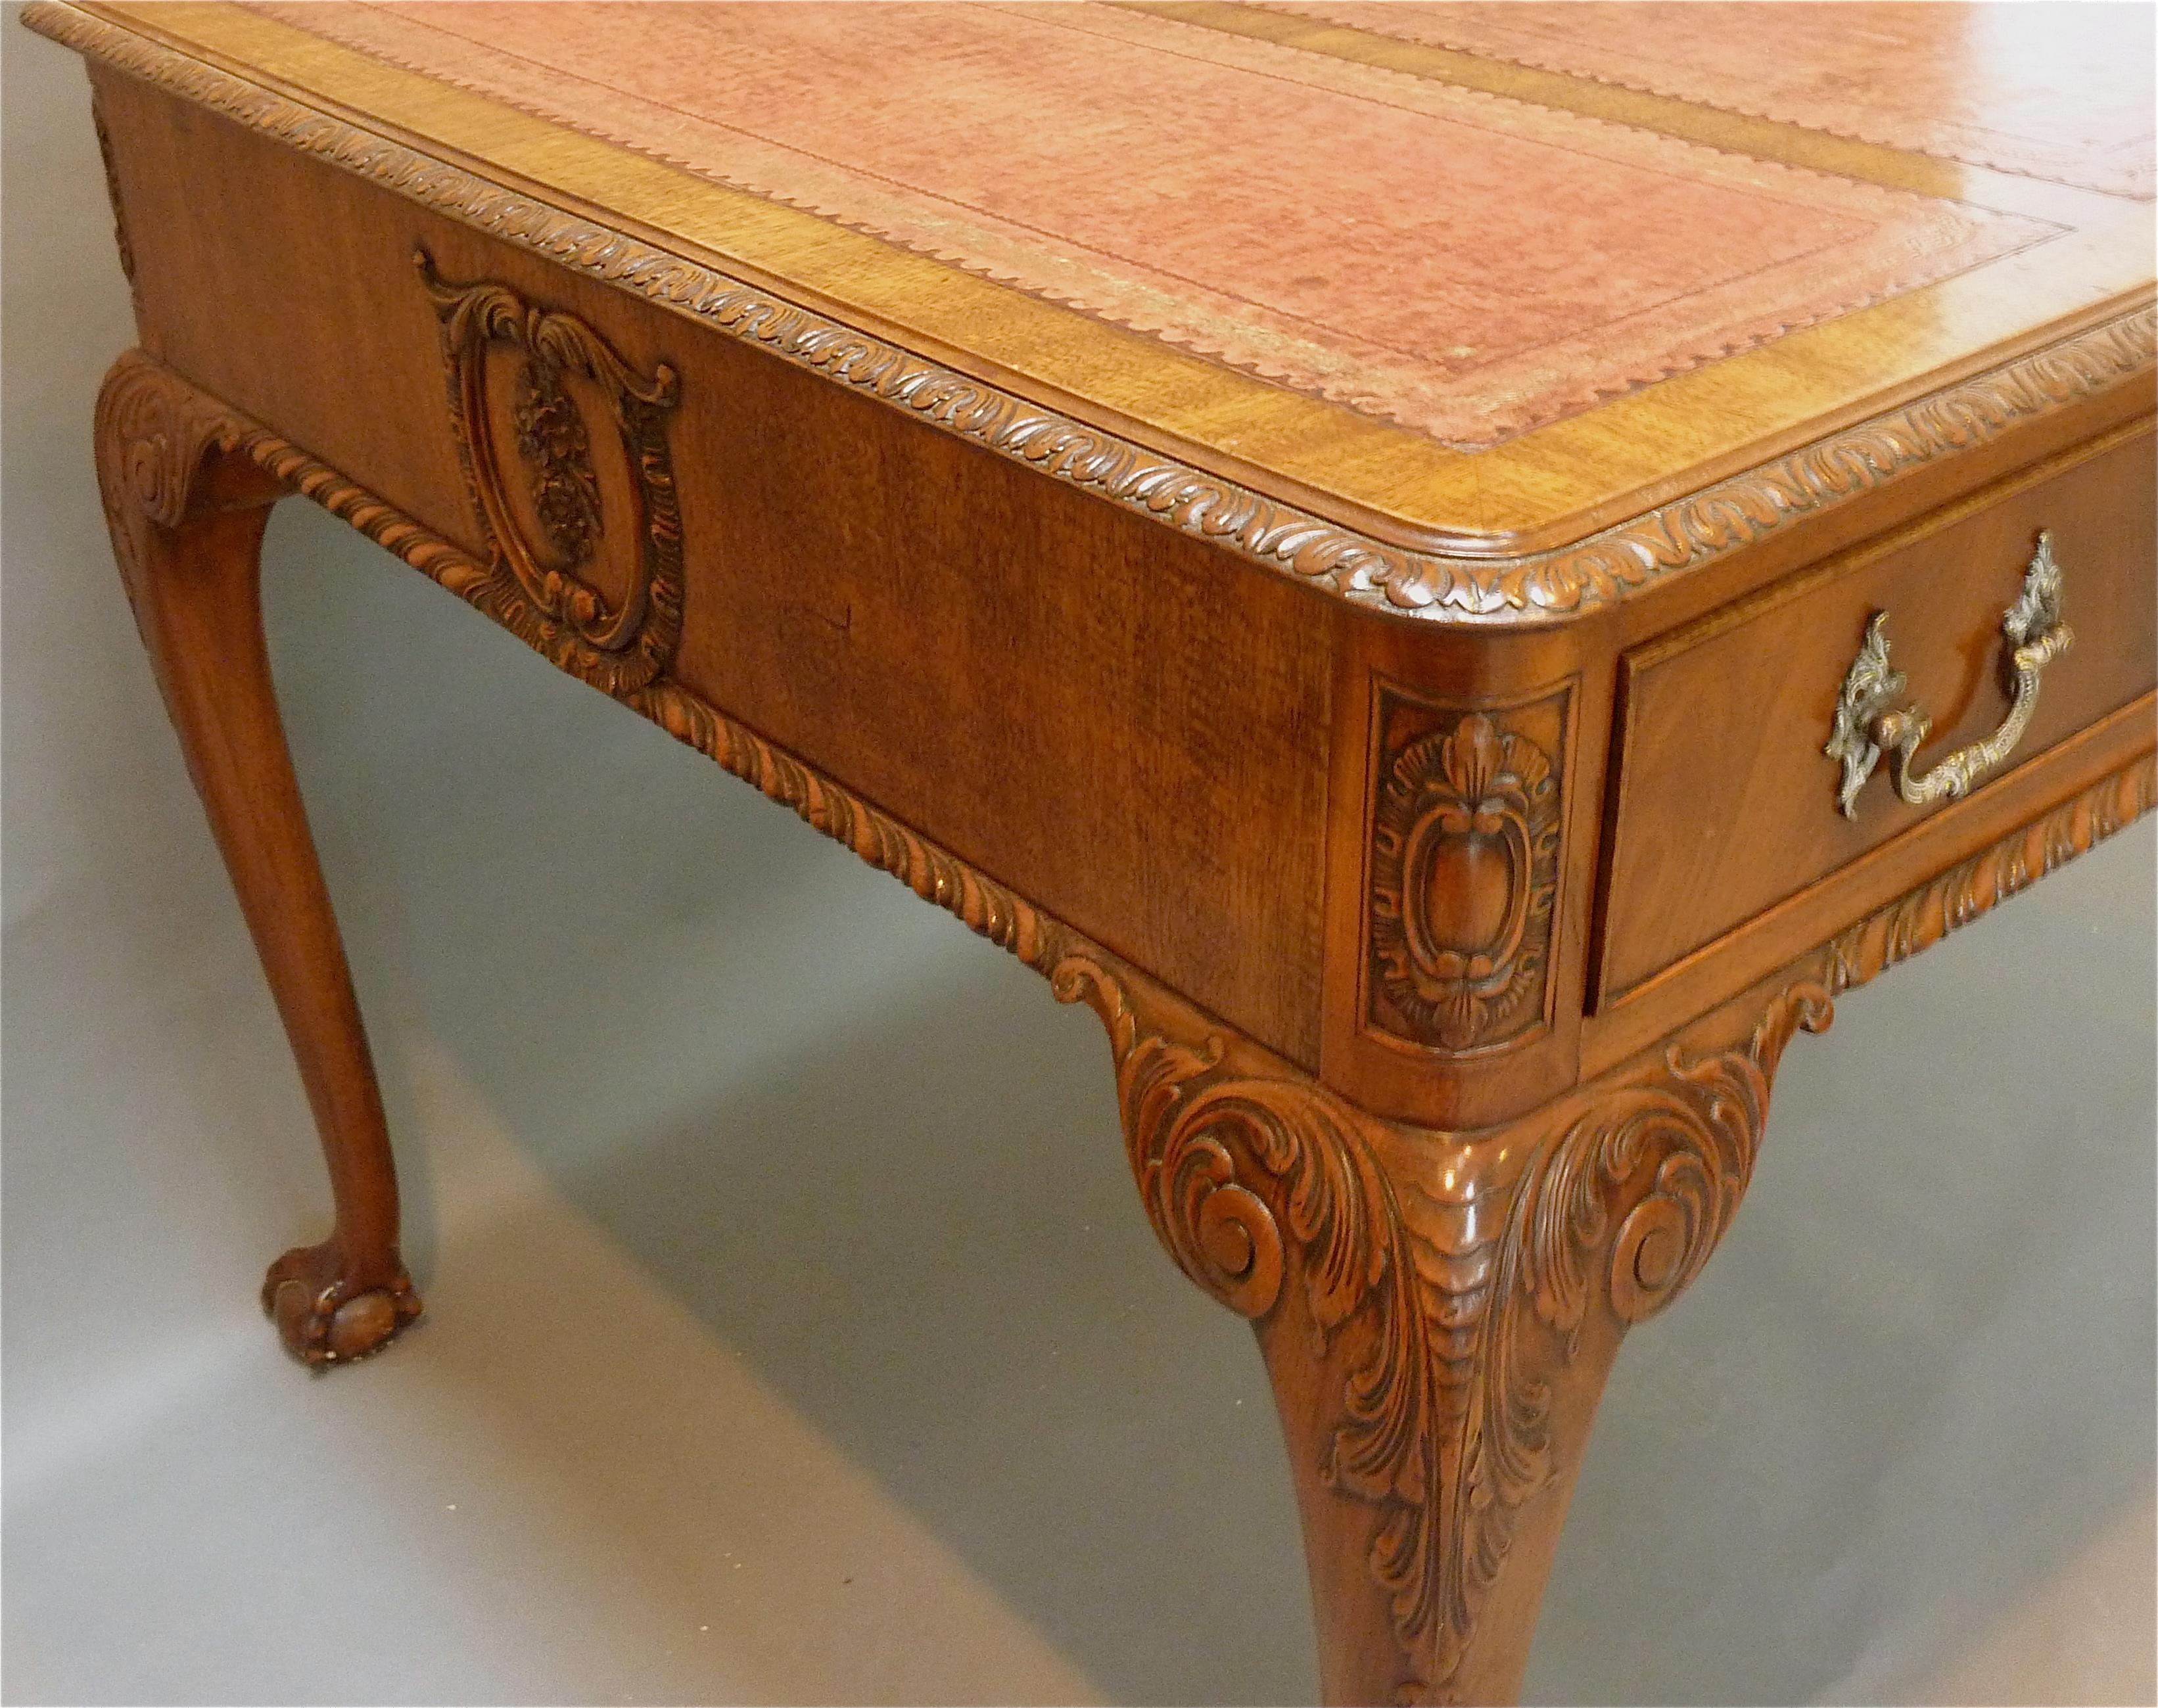 19th Century “Chippendale” Style English Writing Table